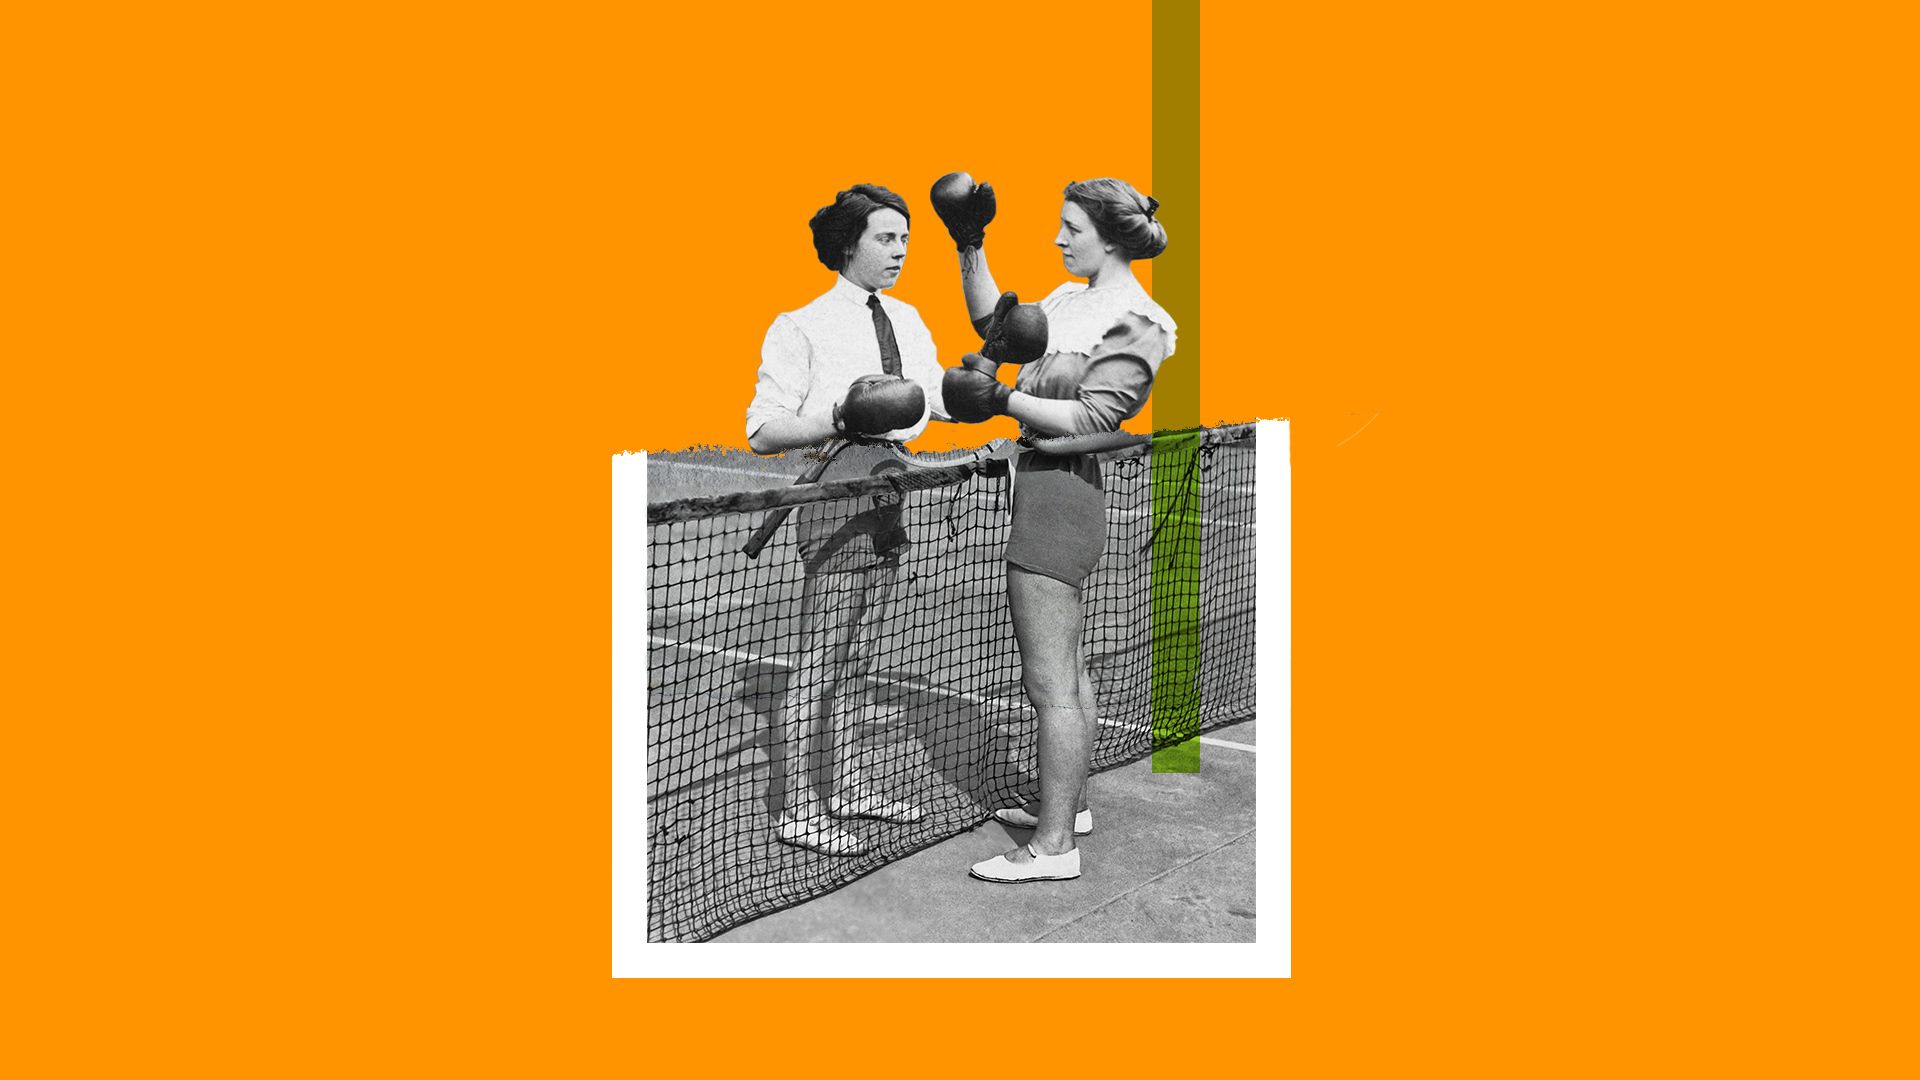 Collage illustration of two historical photos of women playing tennis and learning boxing